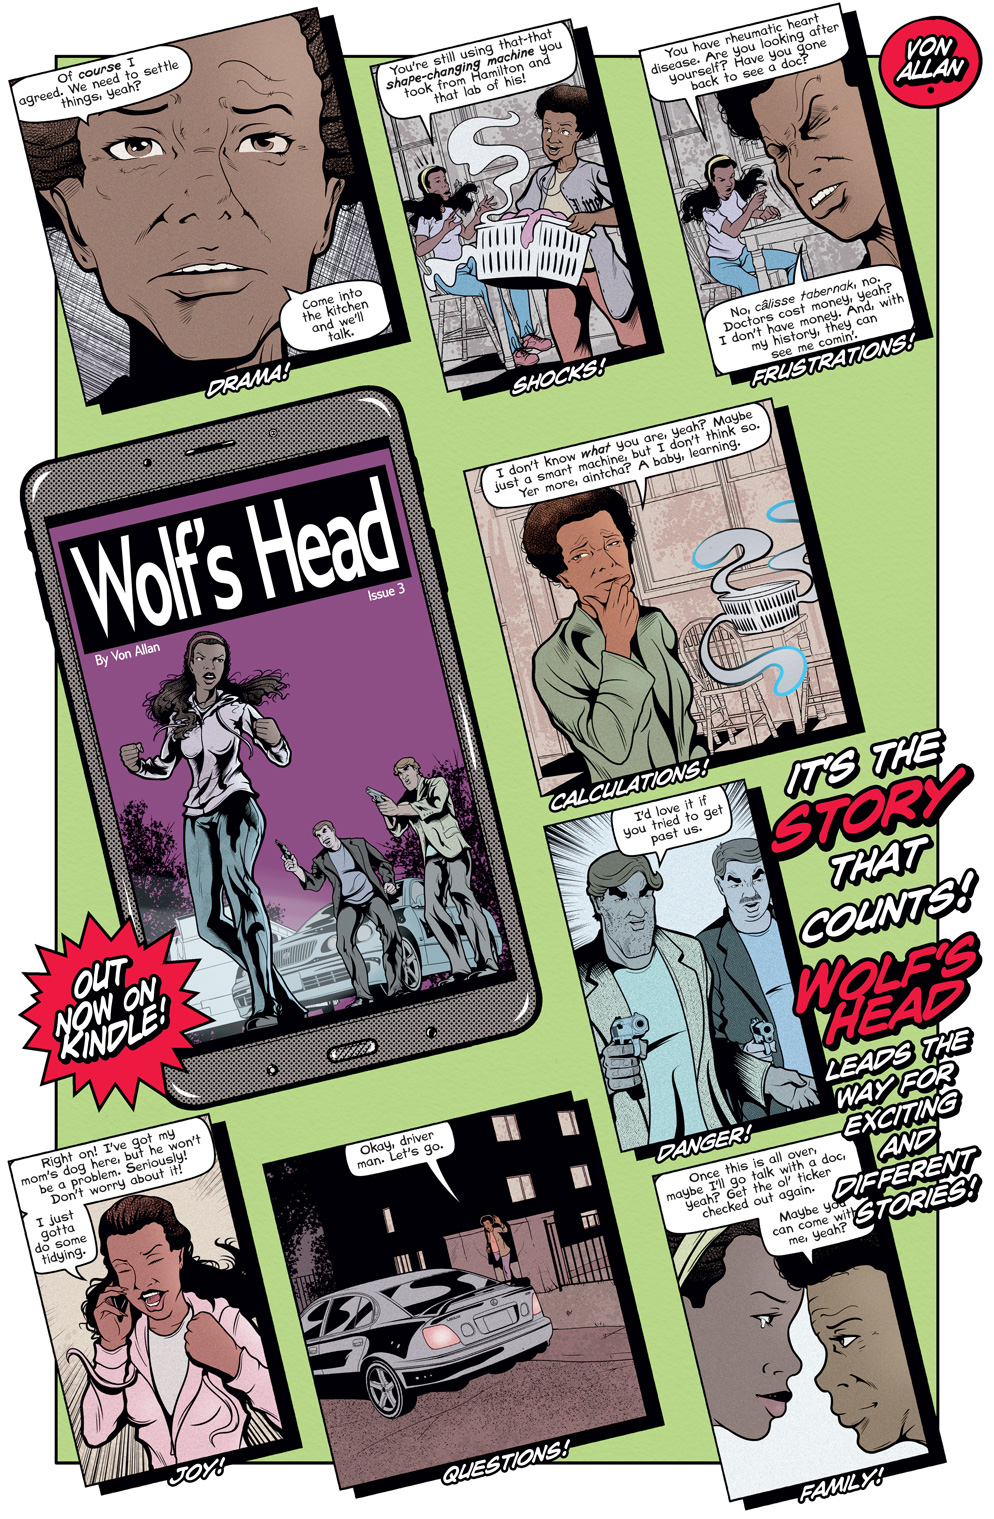 Teaser image for the digital edition of WOLF'S HEAD issue 3 written and illustrated by Von Allan